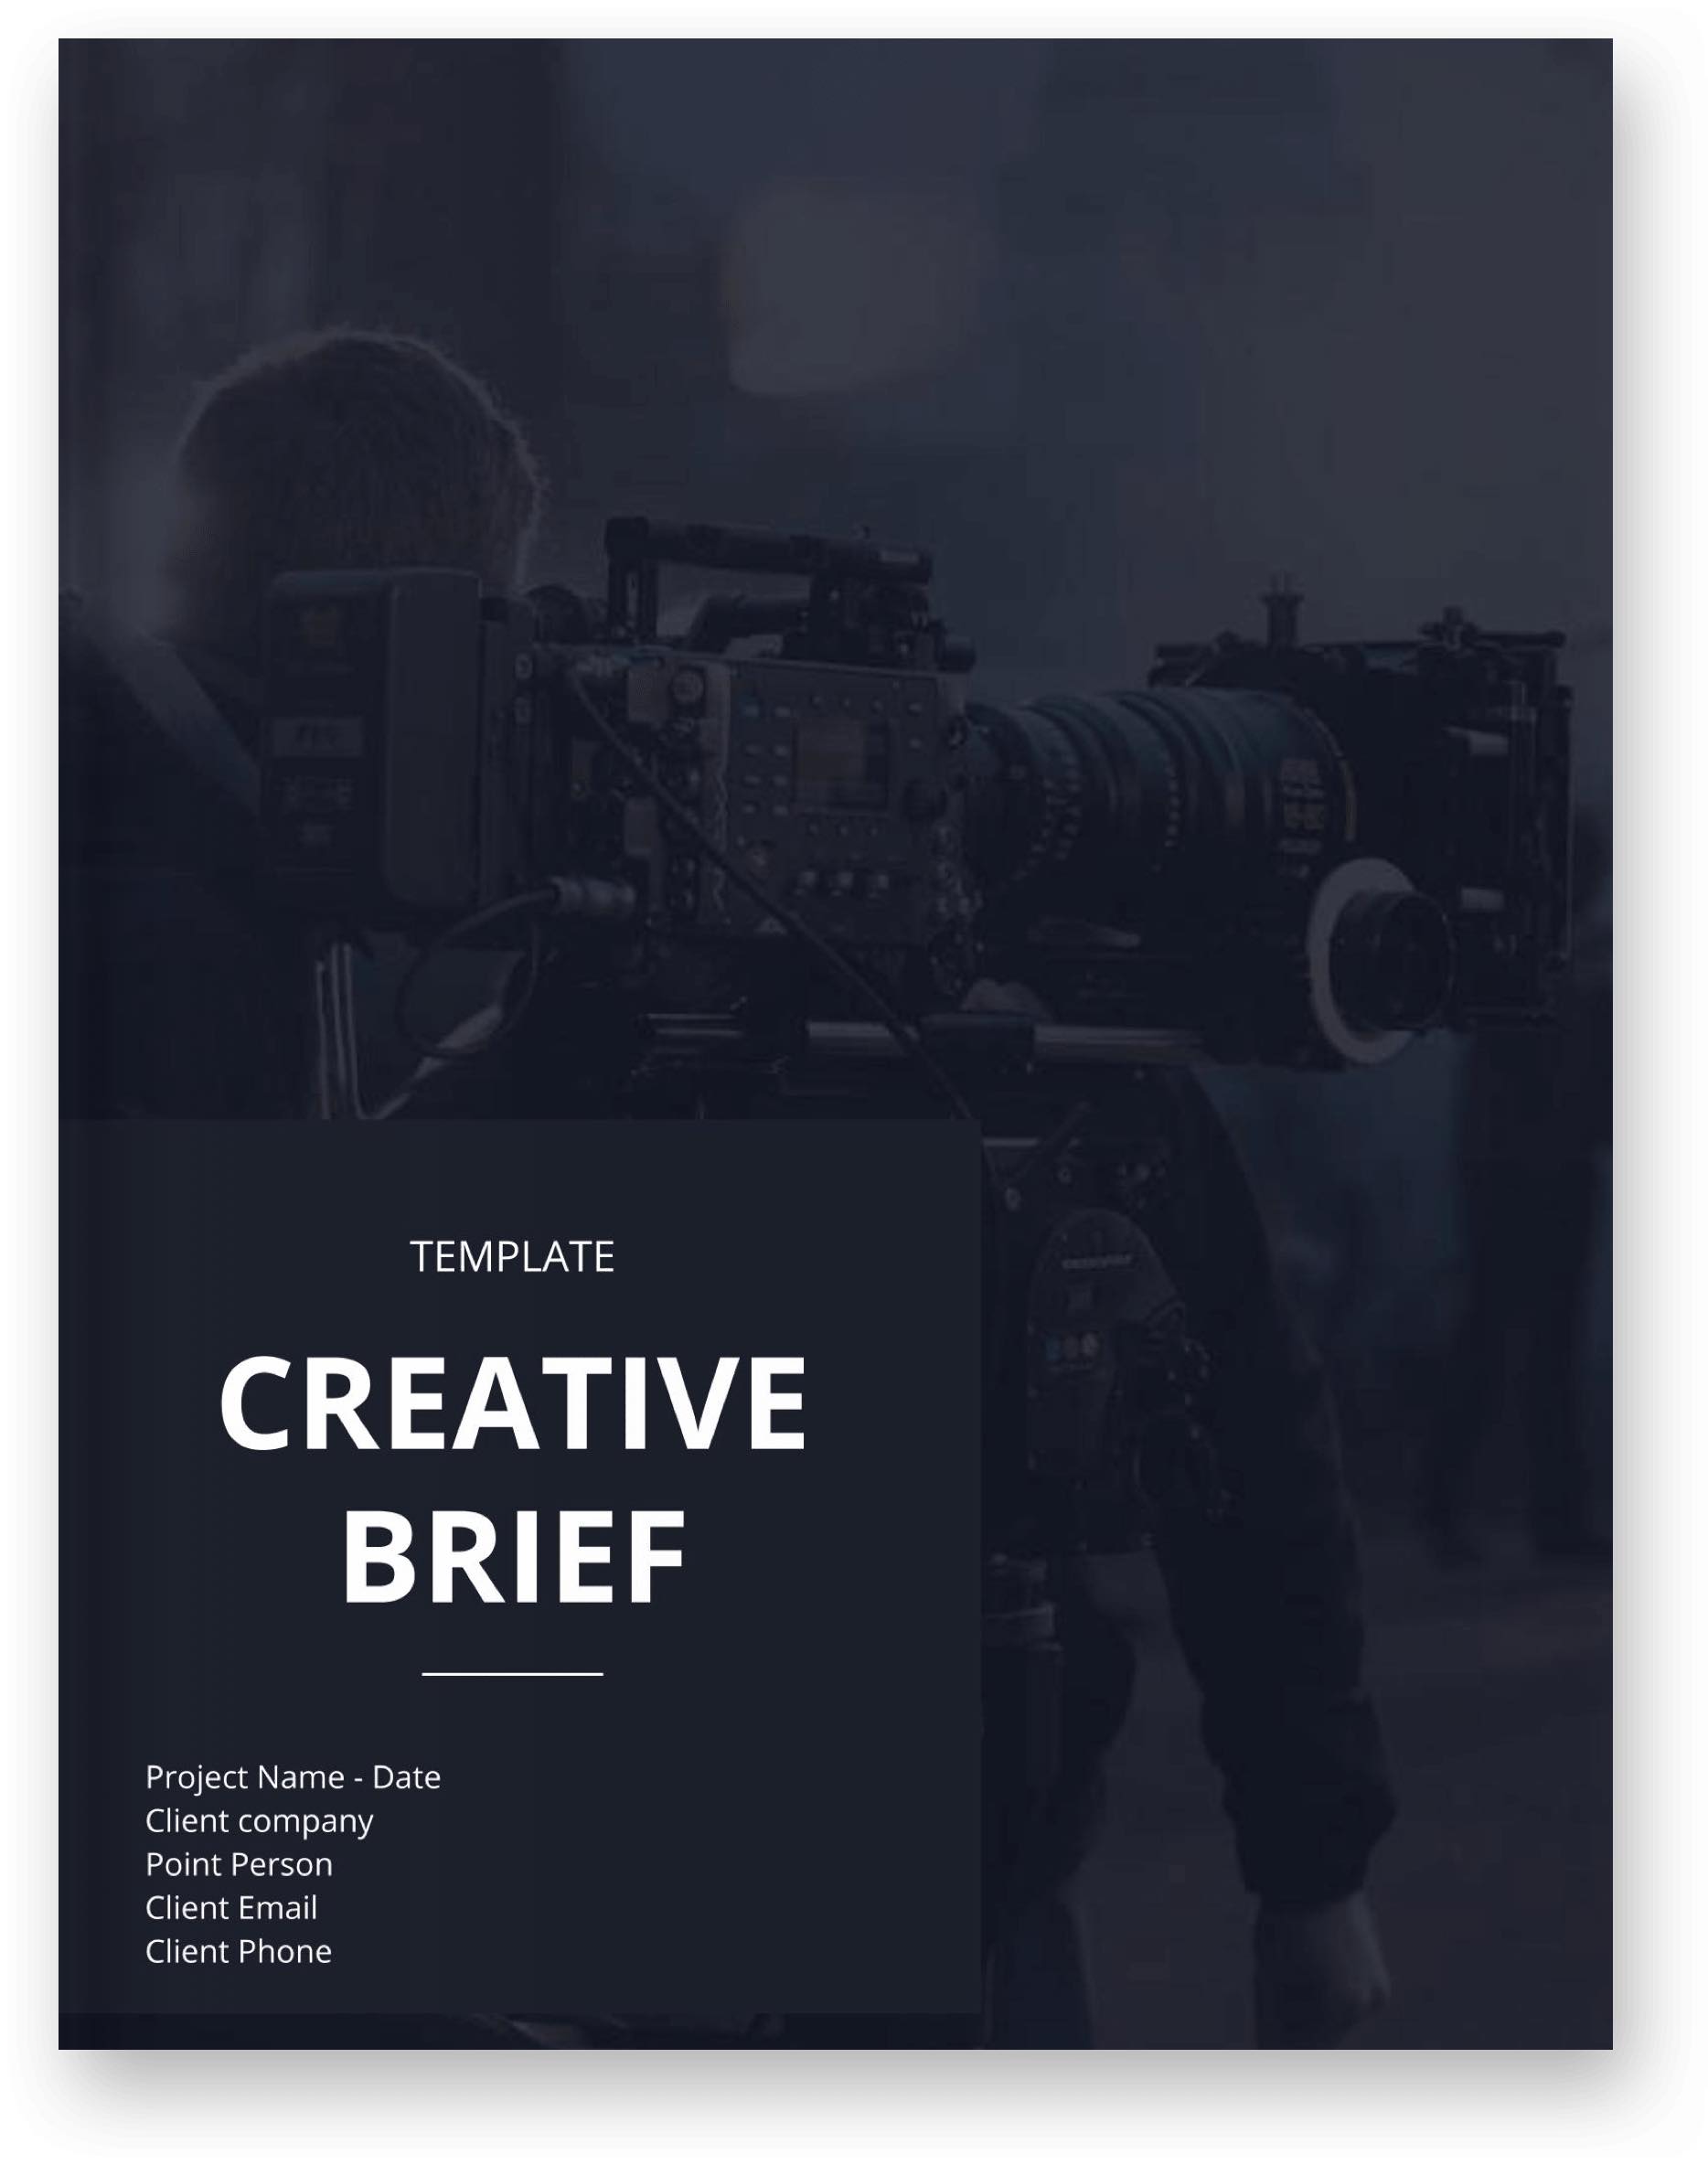 The Best Creative Brief Template For Video Agencies [Free Download] - Cover - StudioBinder